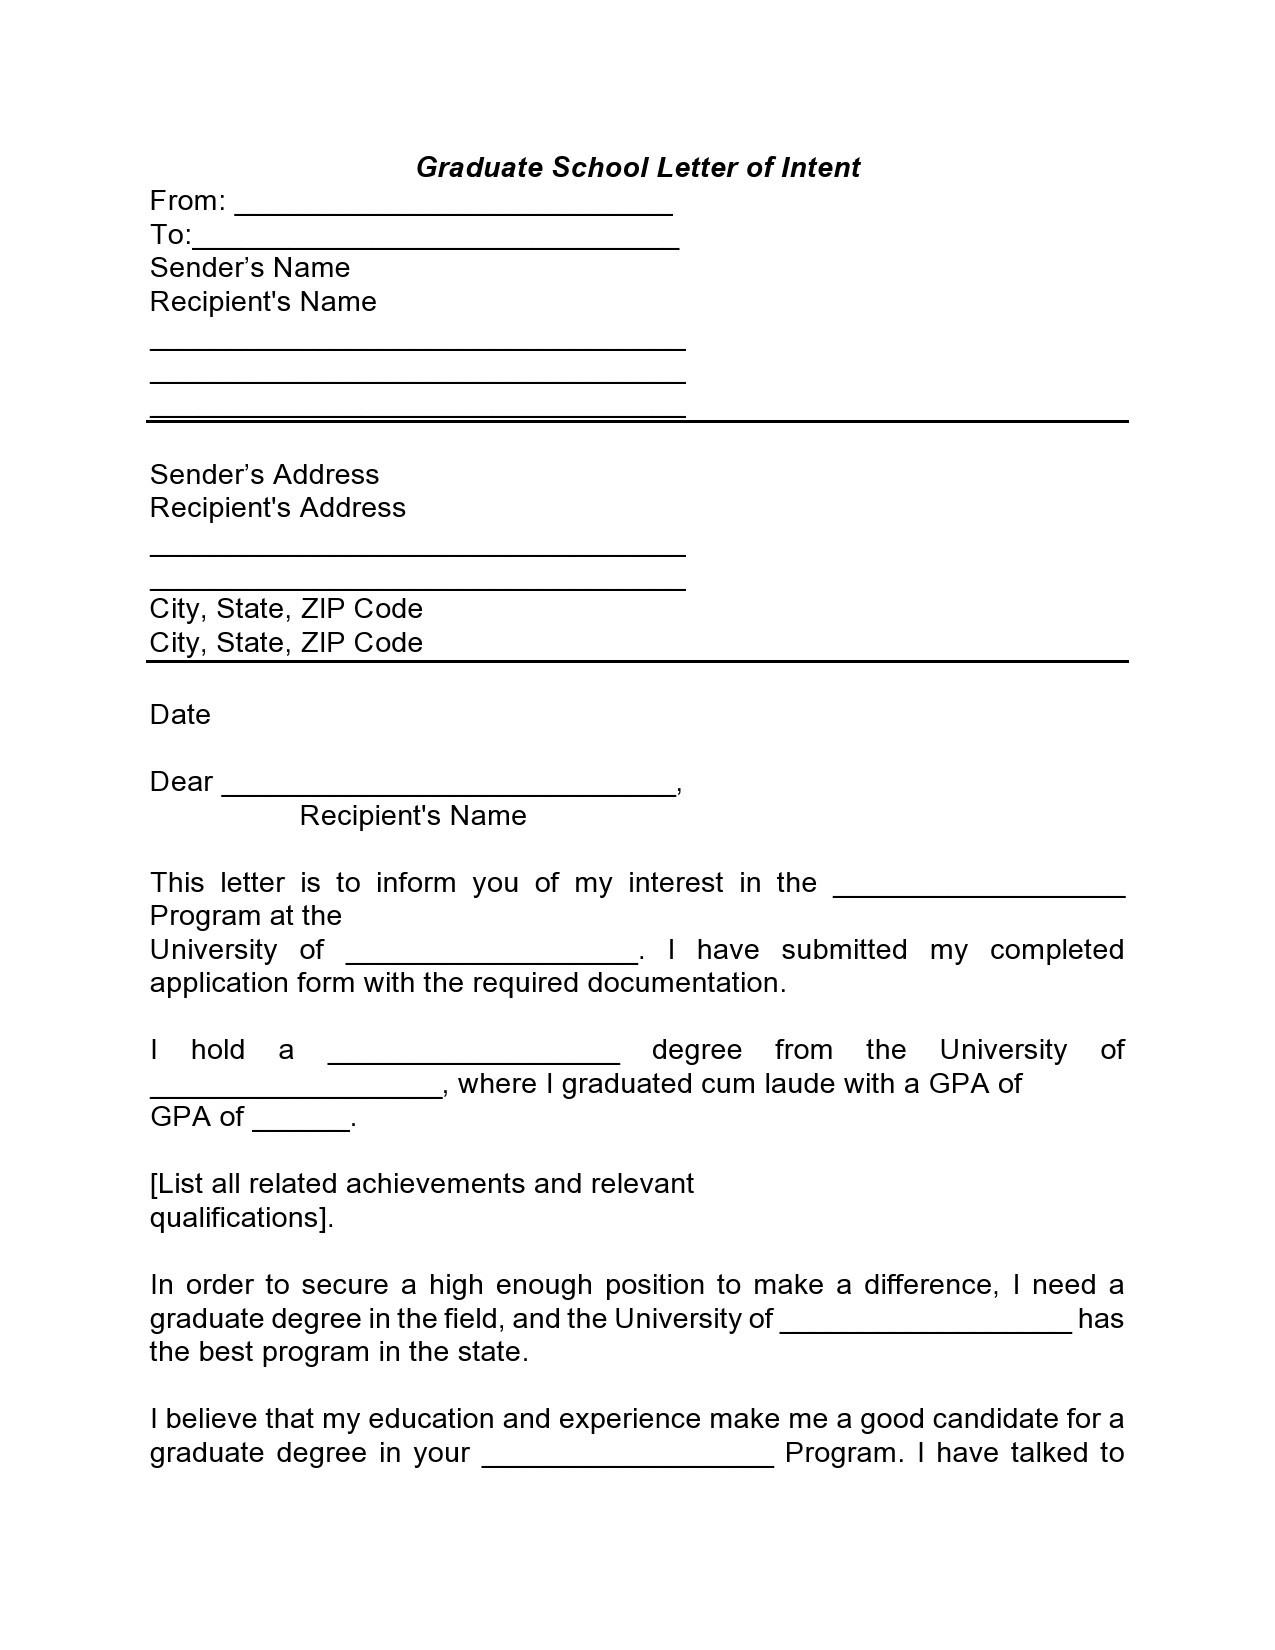 Free letter of intent for graduate school 10